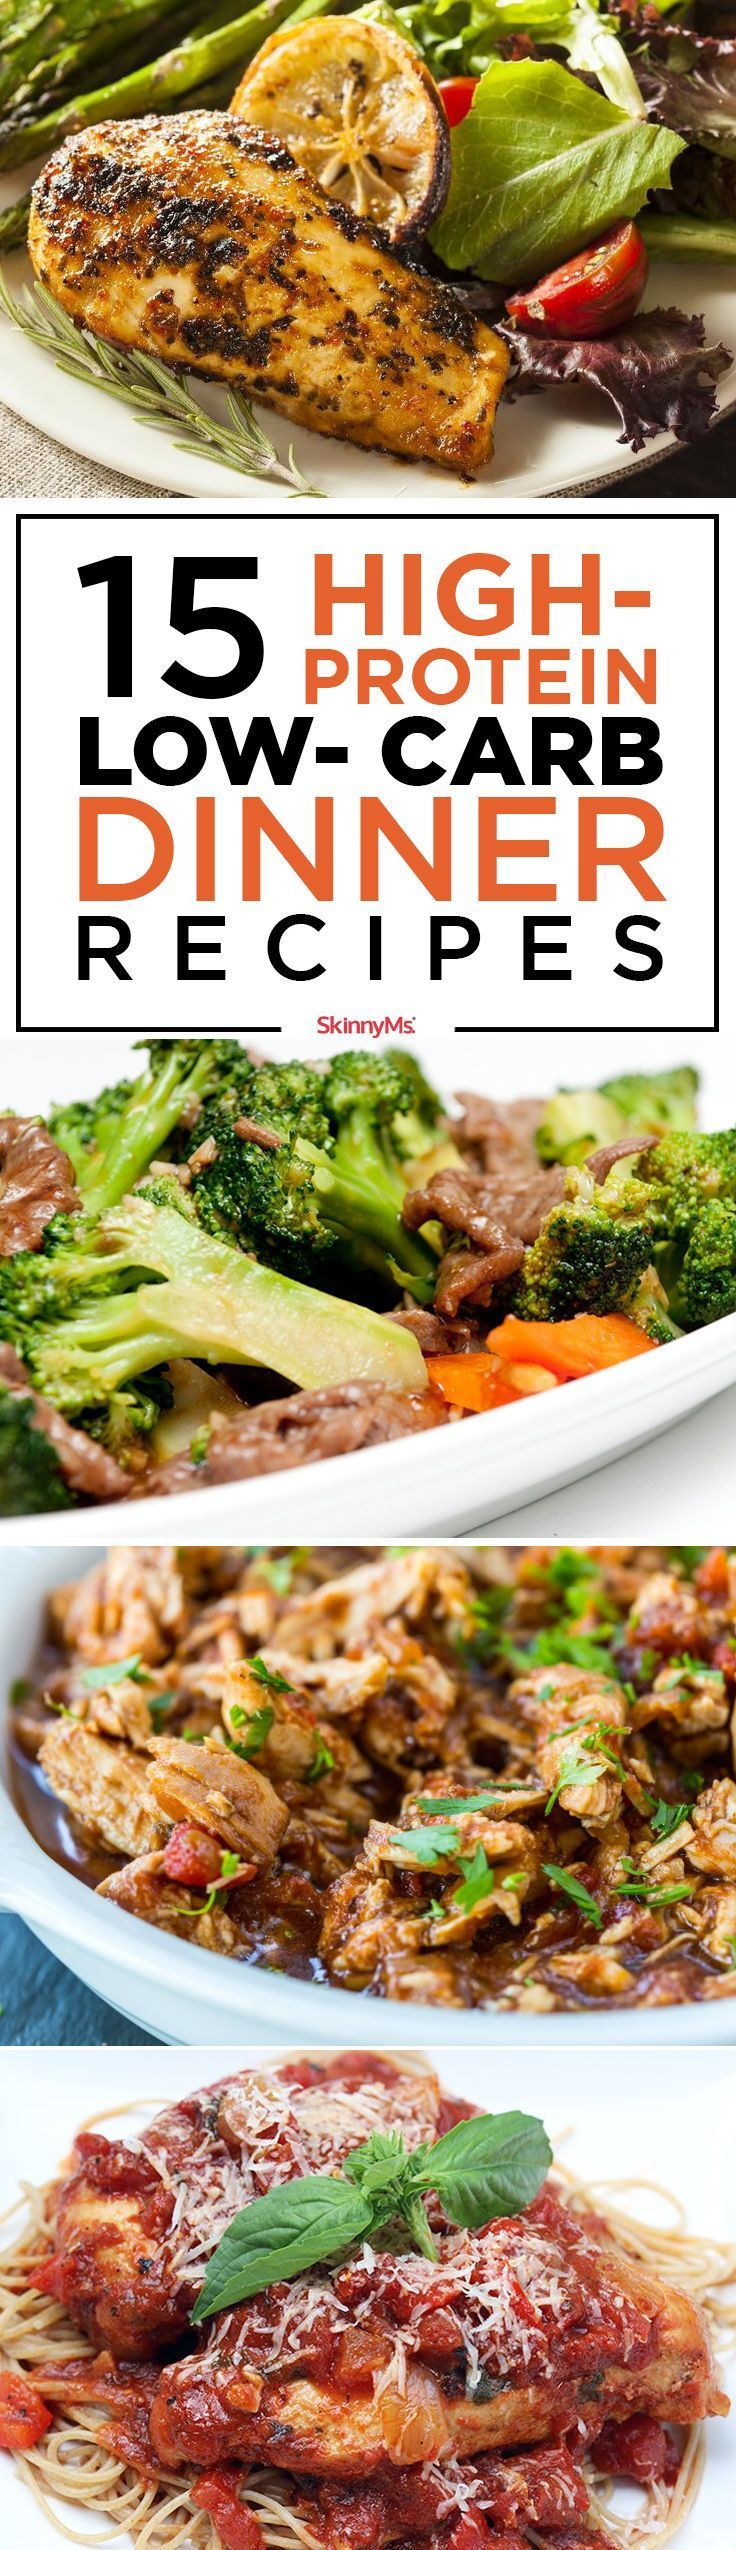 Healthy Low Carb High Protein Recipes
 Best 25 High carb foods ideas on Pinterest